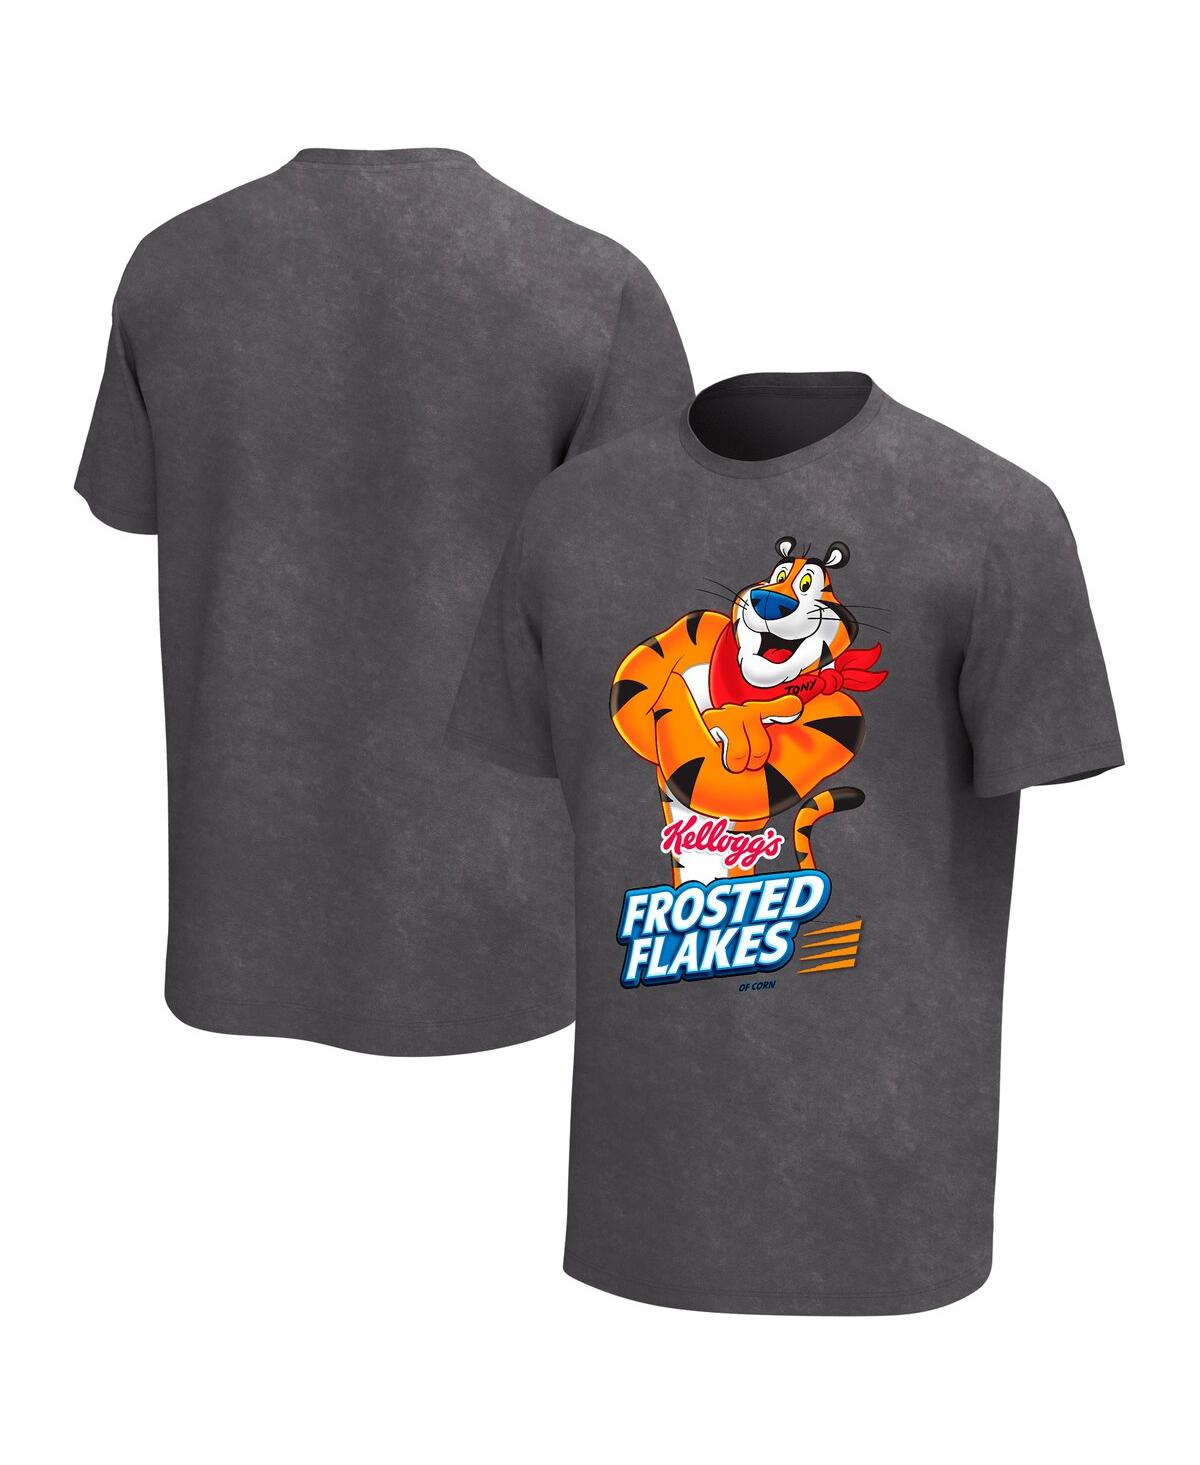 Men's Black Frosted Flakes Tony the Tiger Washed T-shirt - Black